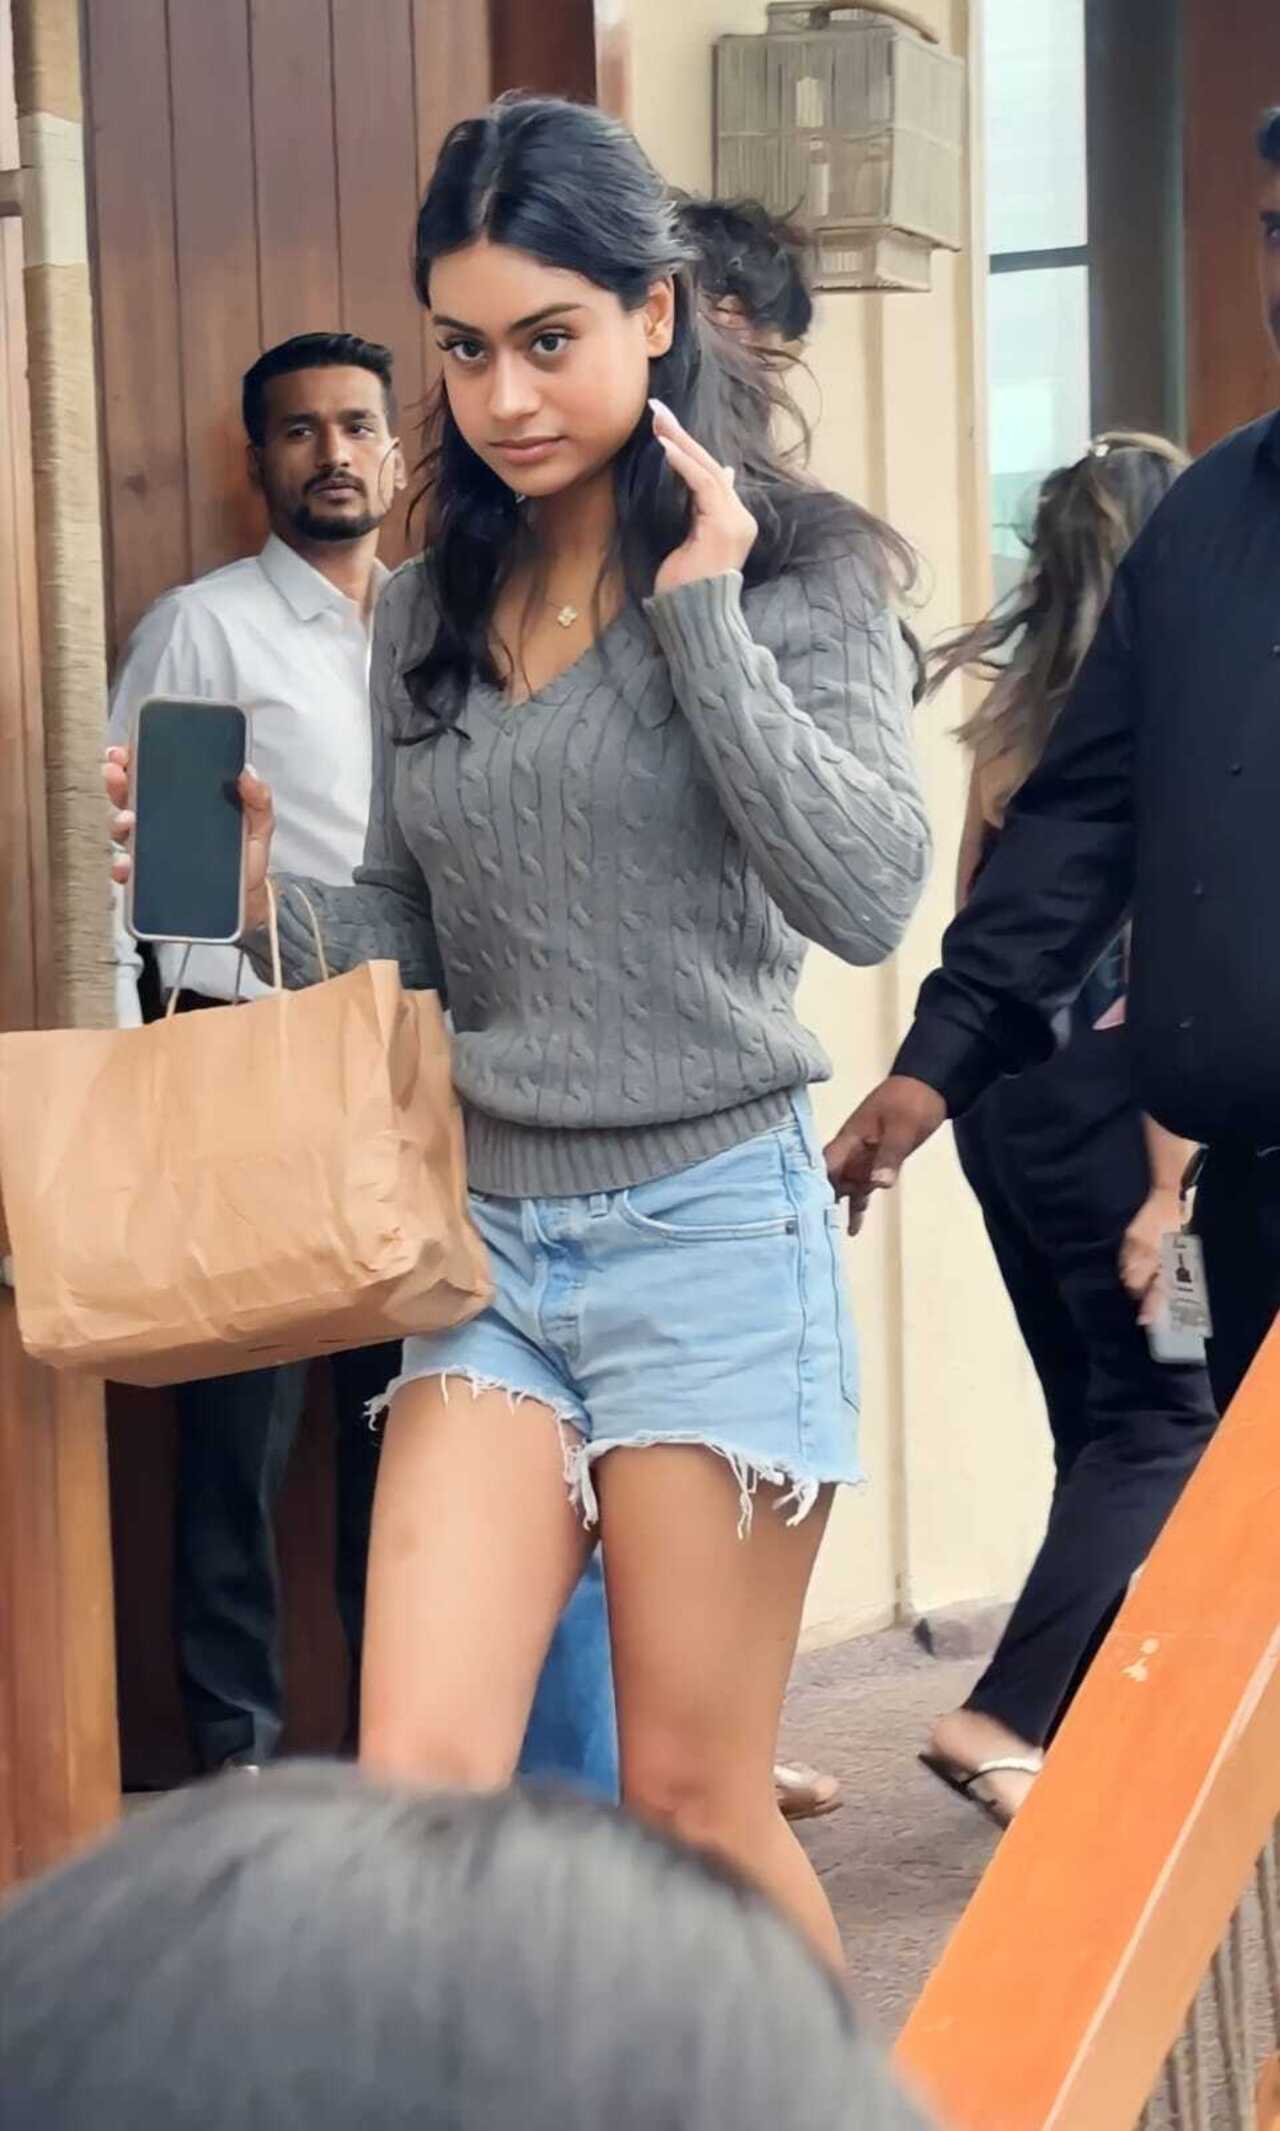 Nysa Devgan looked super cute in a grey top and denim shorts as she was snapped in the city